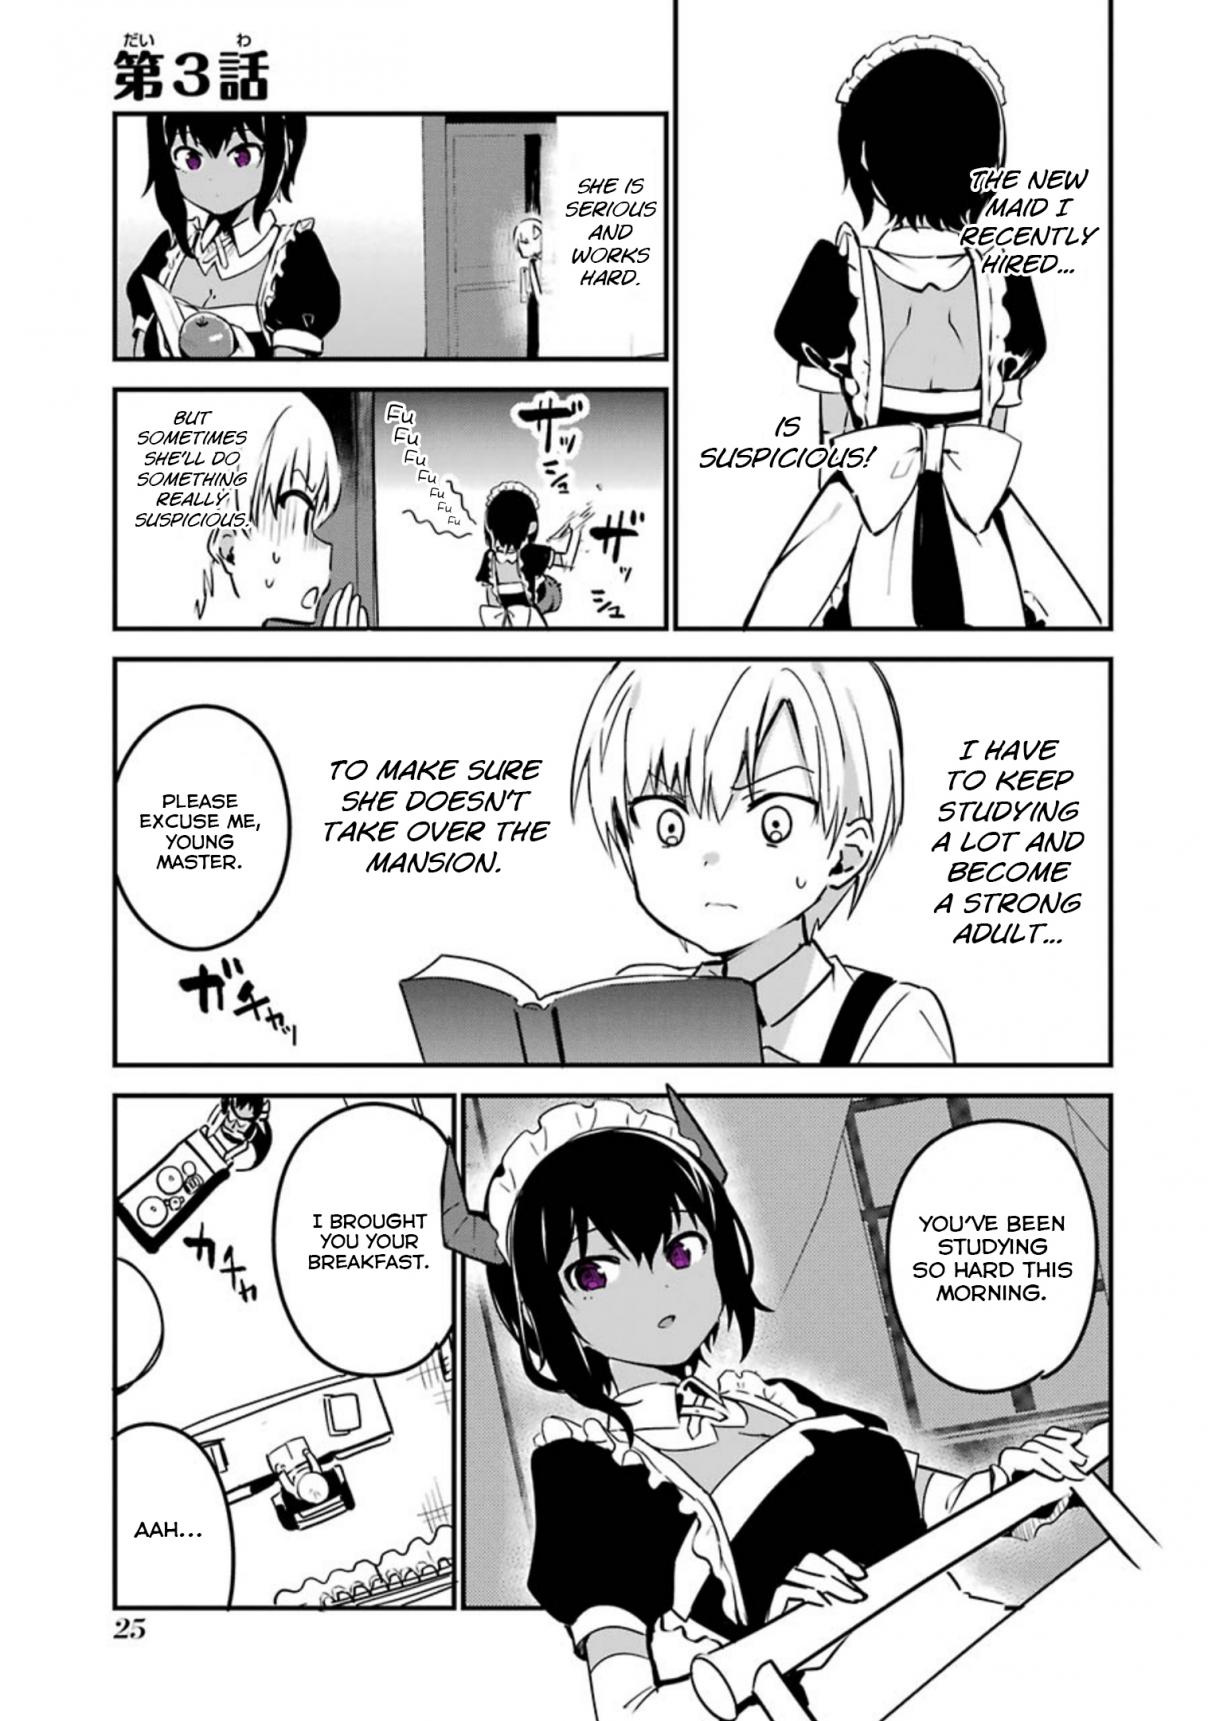 My Recently Hired Maid is Suspicious Vol. 1 Ch. 1.2